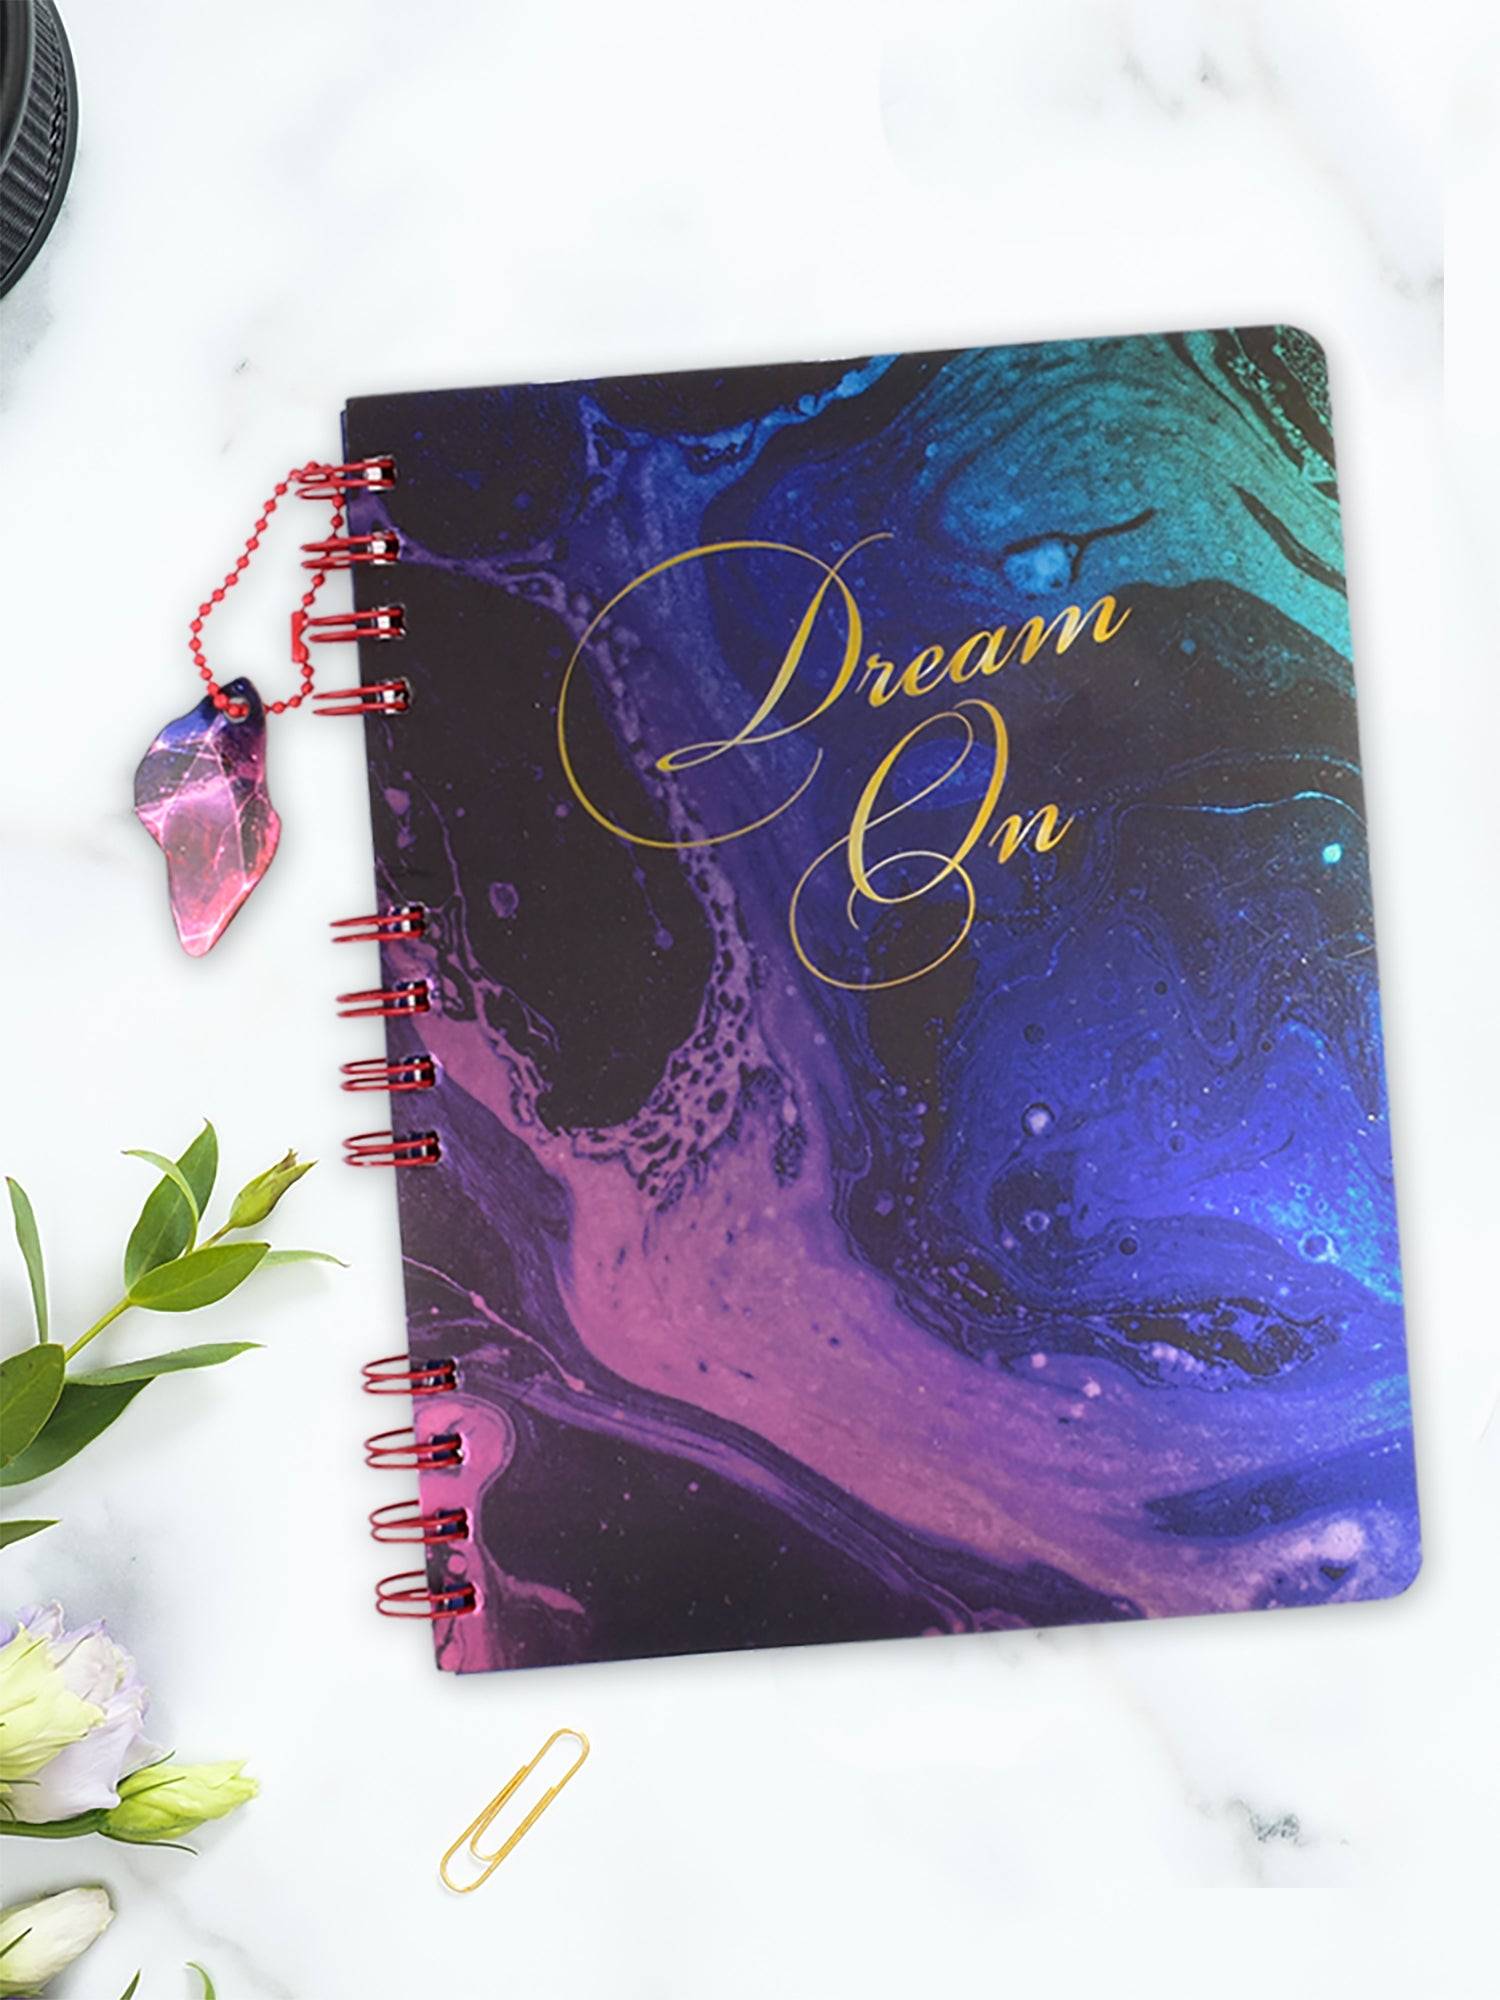 Doodle Dream on Hard Bound B5 Notebook with Bookmark Dangler - DoodleCollection Store